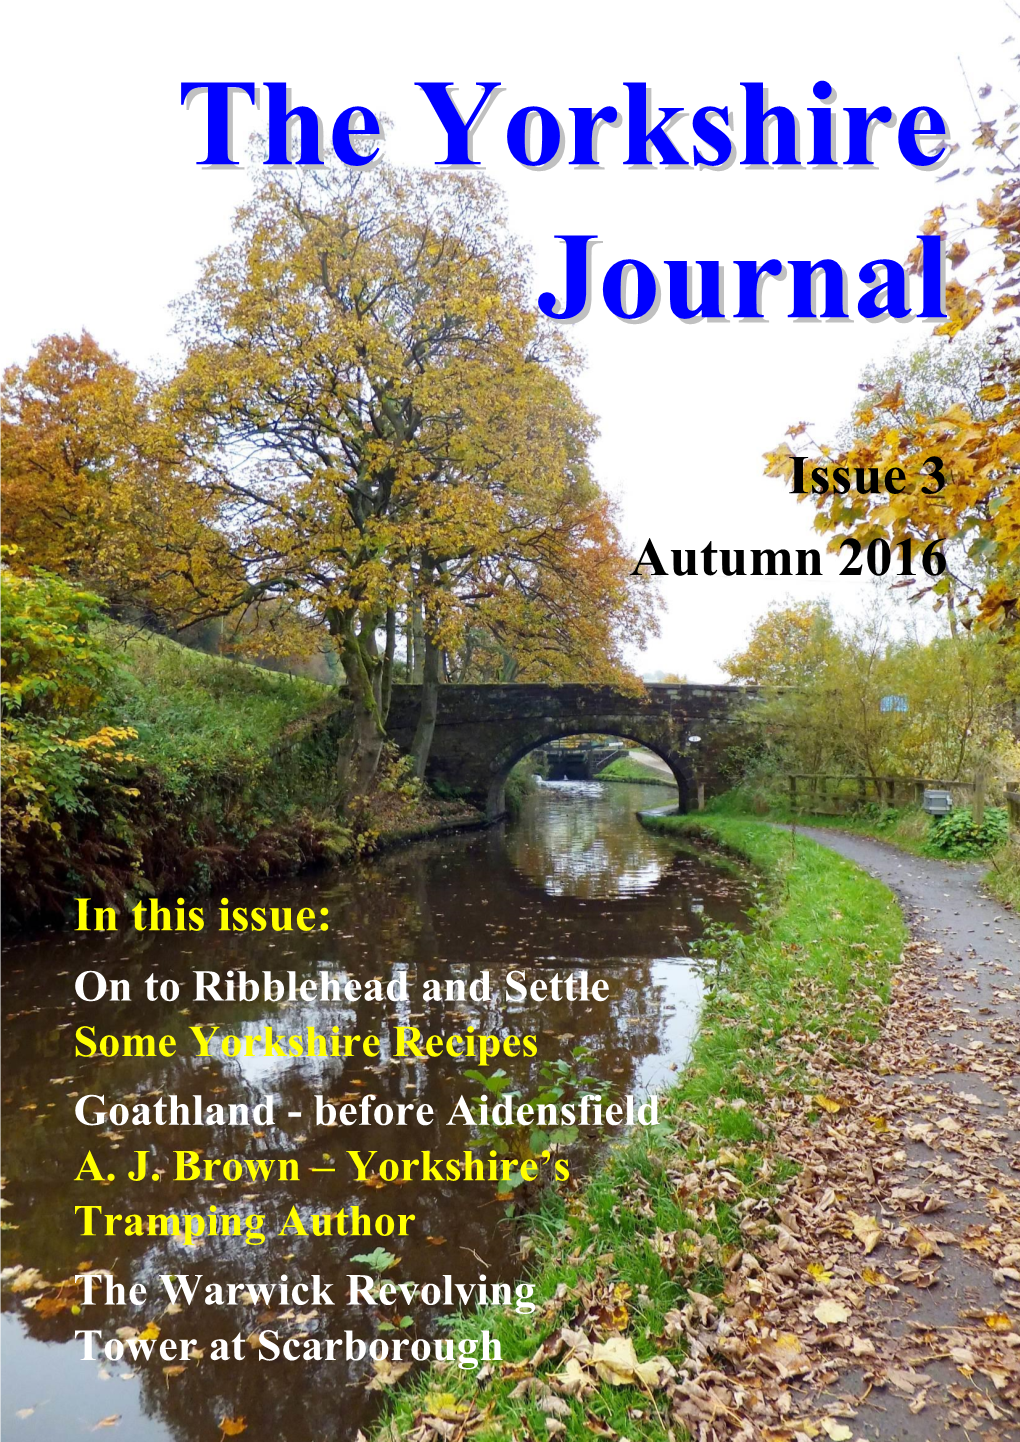 The Yorkshire Journal Issue 3 Autumn 2016